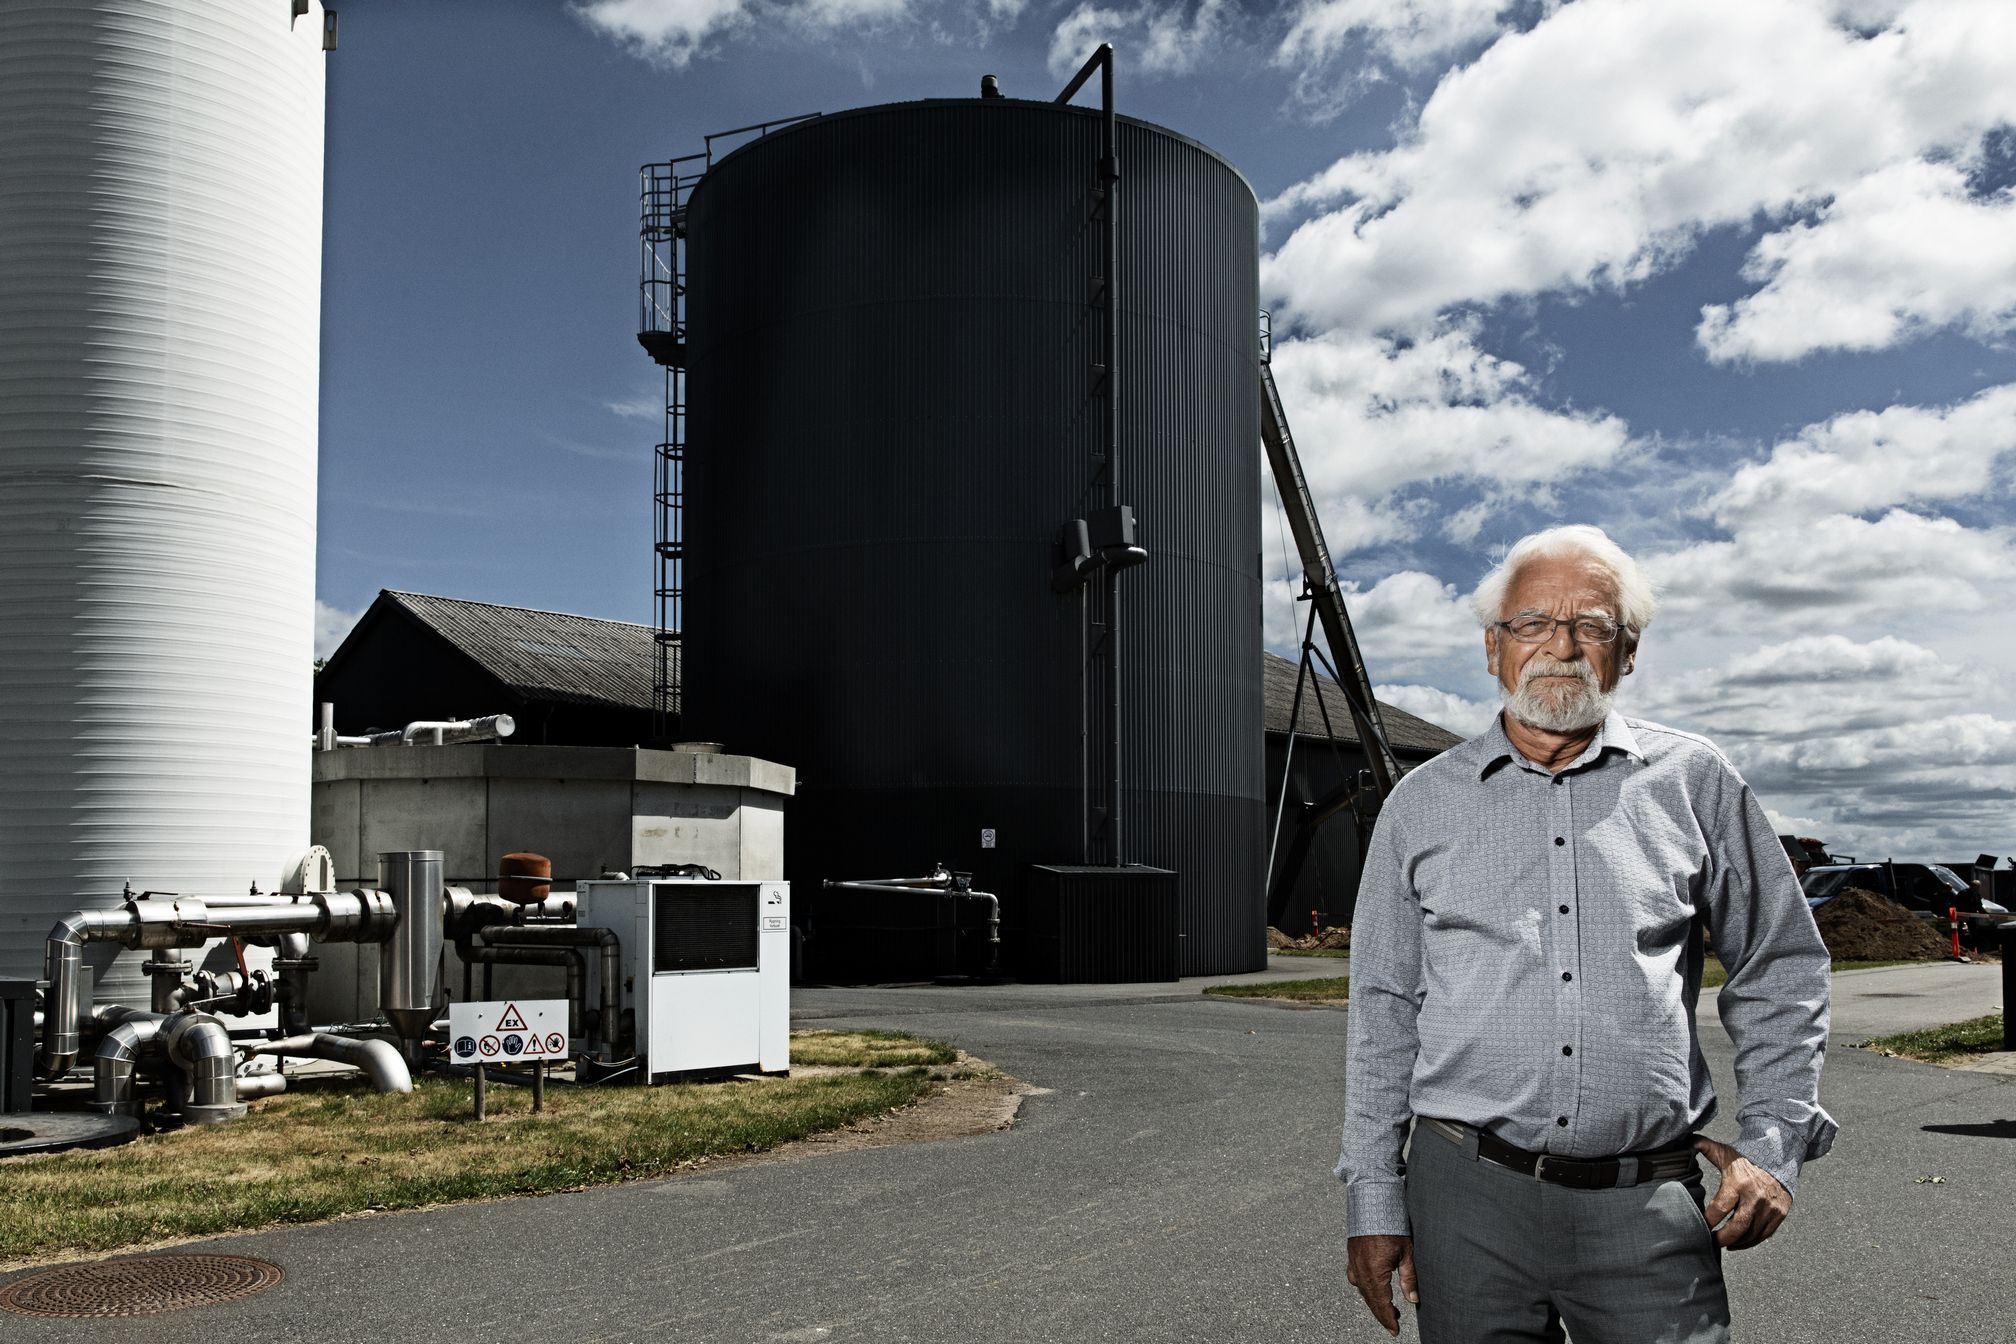 Project Leader, Senior Principal Scientist John Bøgild Hansen at the research facility in Foulum, Denmark, where Haldor Topsoe and University of Aarhus are also demonstrating a more efficient use of biogas.  